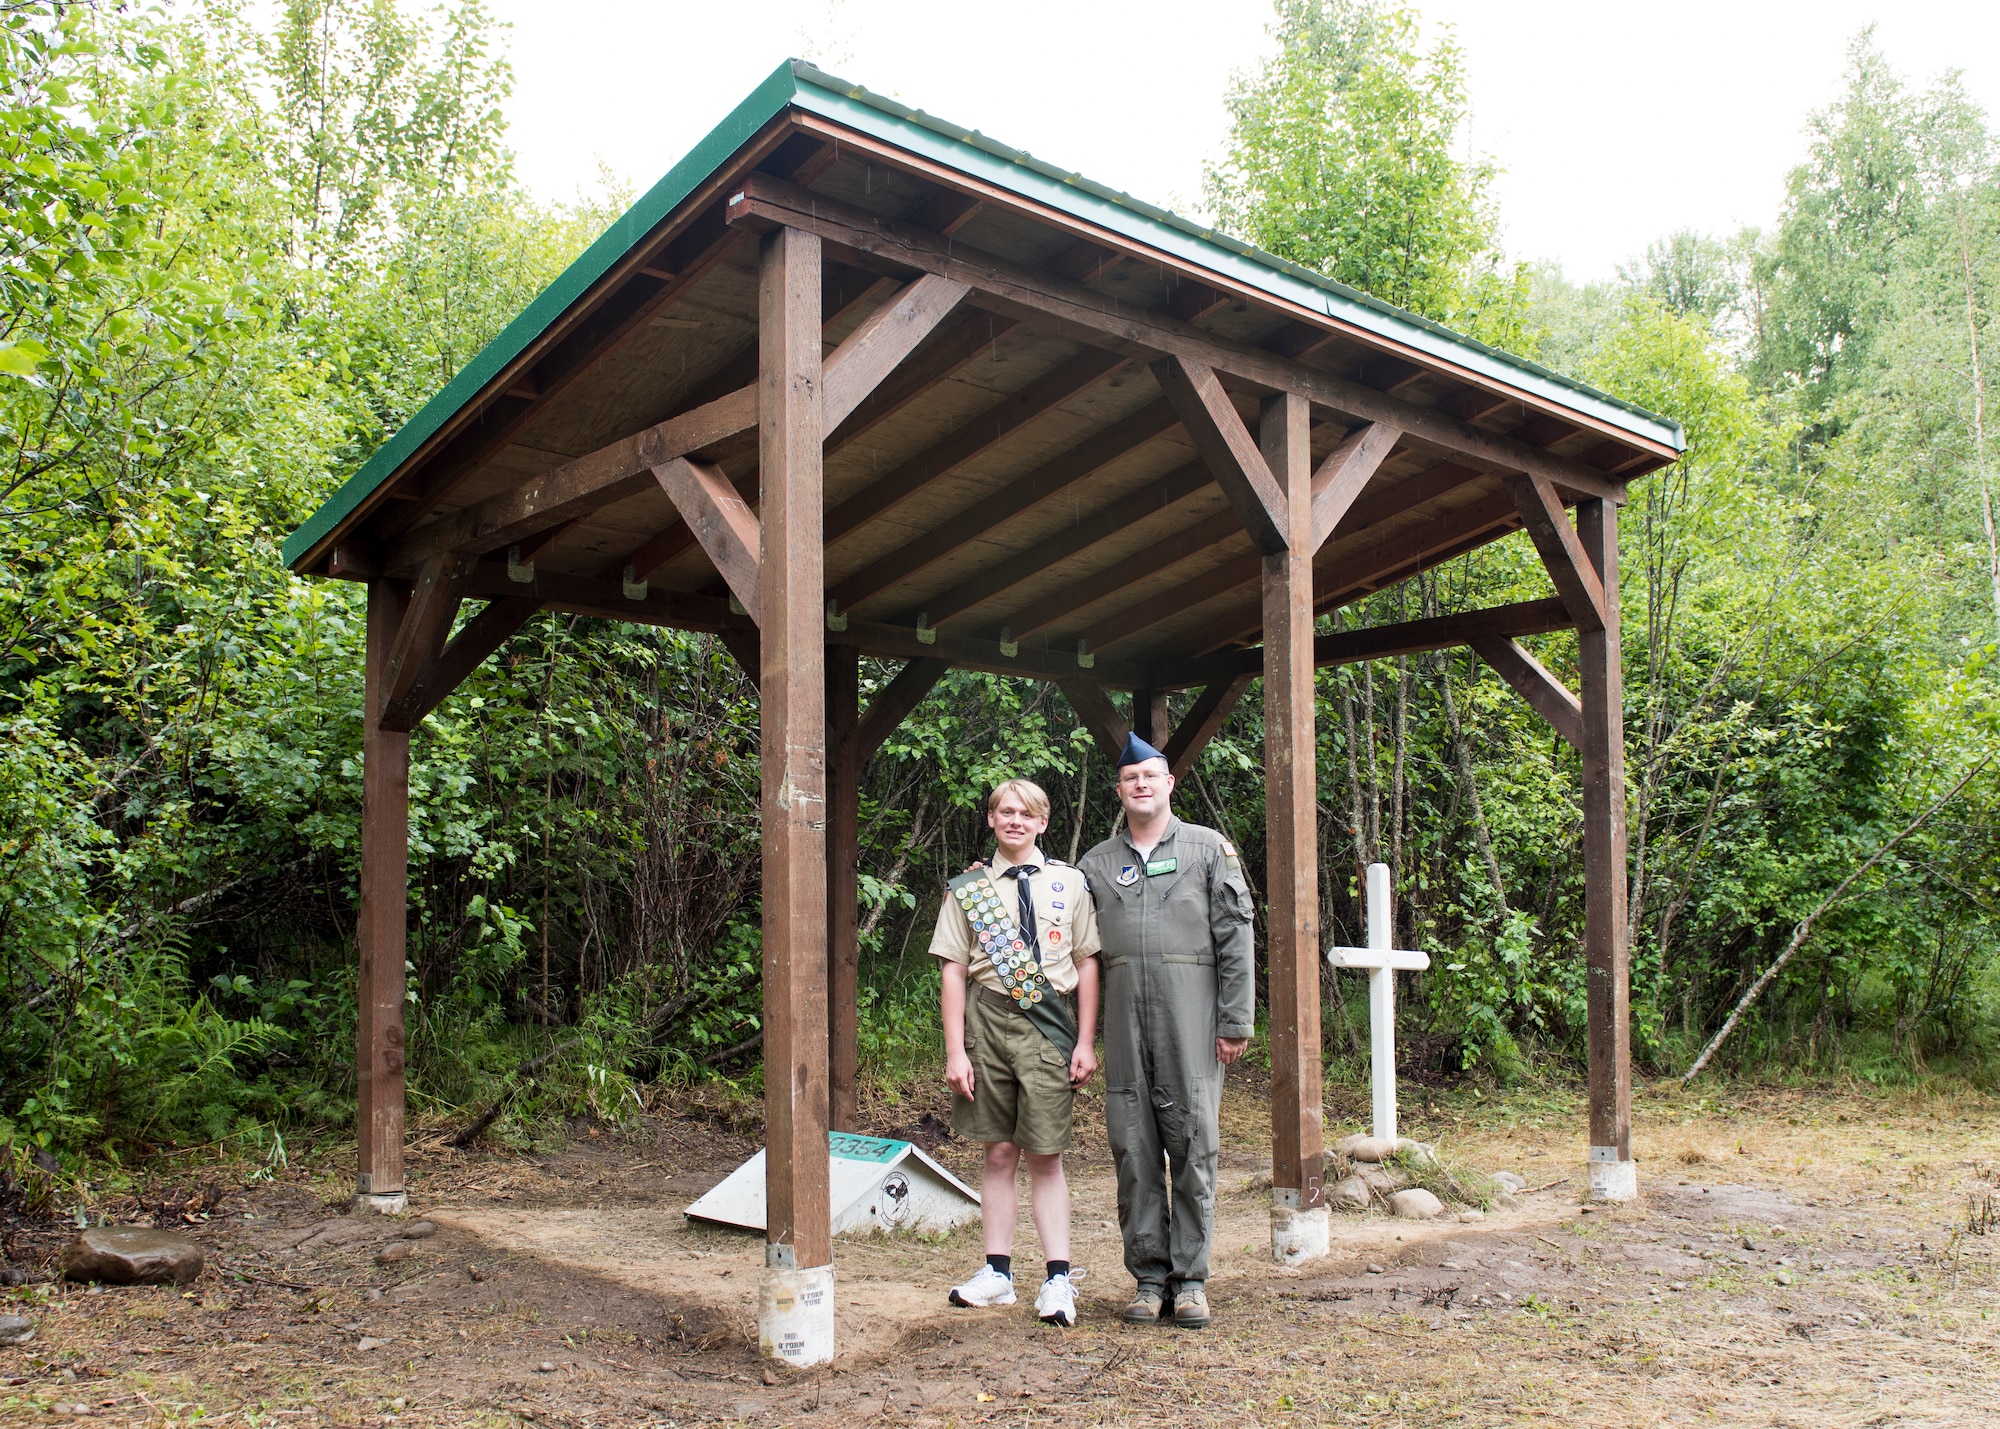 Daryn Moore, a member of Scouts BSA Troop 54, and his father, U.S. Air Force Tech. Sgt. Clayton Moore, 962nd Airborne Air Control Squadron communications systems operator and Troop 54 assistant scoutmaster, pose for a photo at Joint Base Elmendorf-Richardson, Alaska, Aug. 11, 2020. Daryn built a pavilion with help from Clayton, other Scouts and members of the 962nd Airborne Air Control Squadron to protect the memory box and cross at the Yukla 27 crash site from rain and snow. The pavilion is Daryn’s Eagle Scout Service Project, a project that benefits the community as a requirement to gain the rank of Eagle Scout, the highest rank in Scouting.